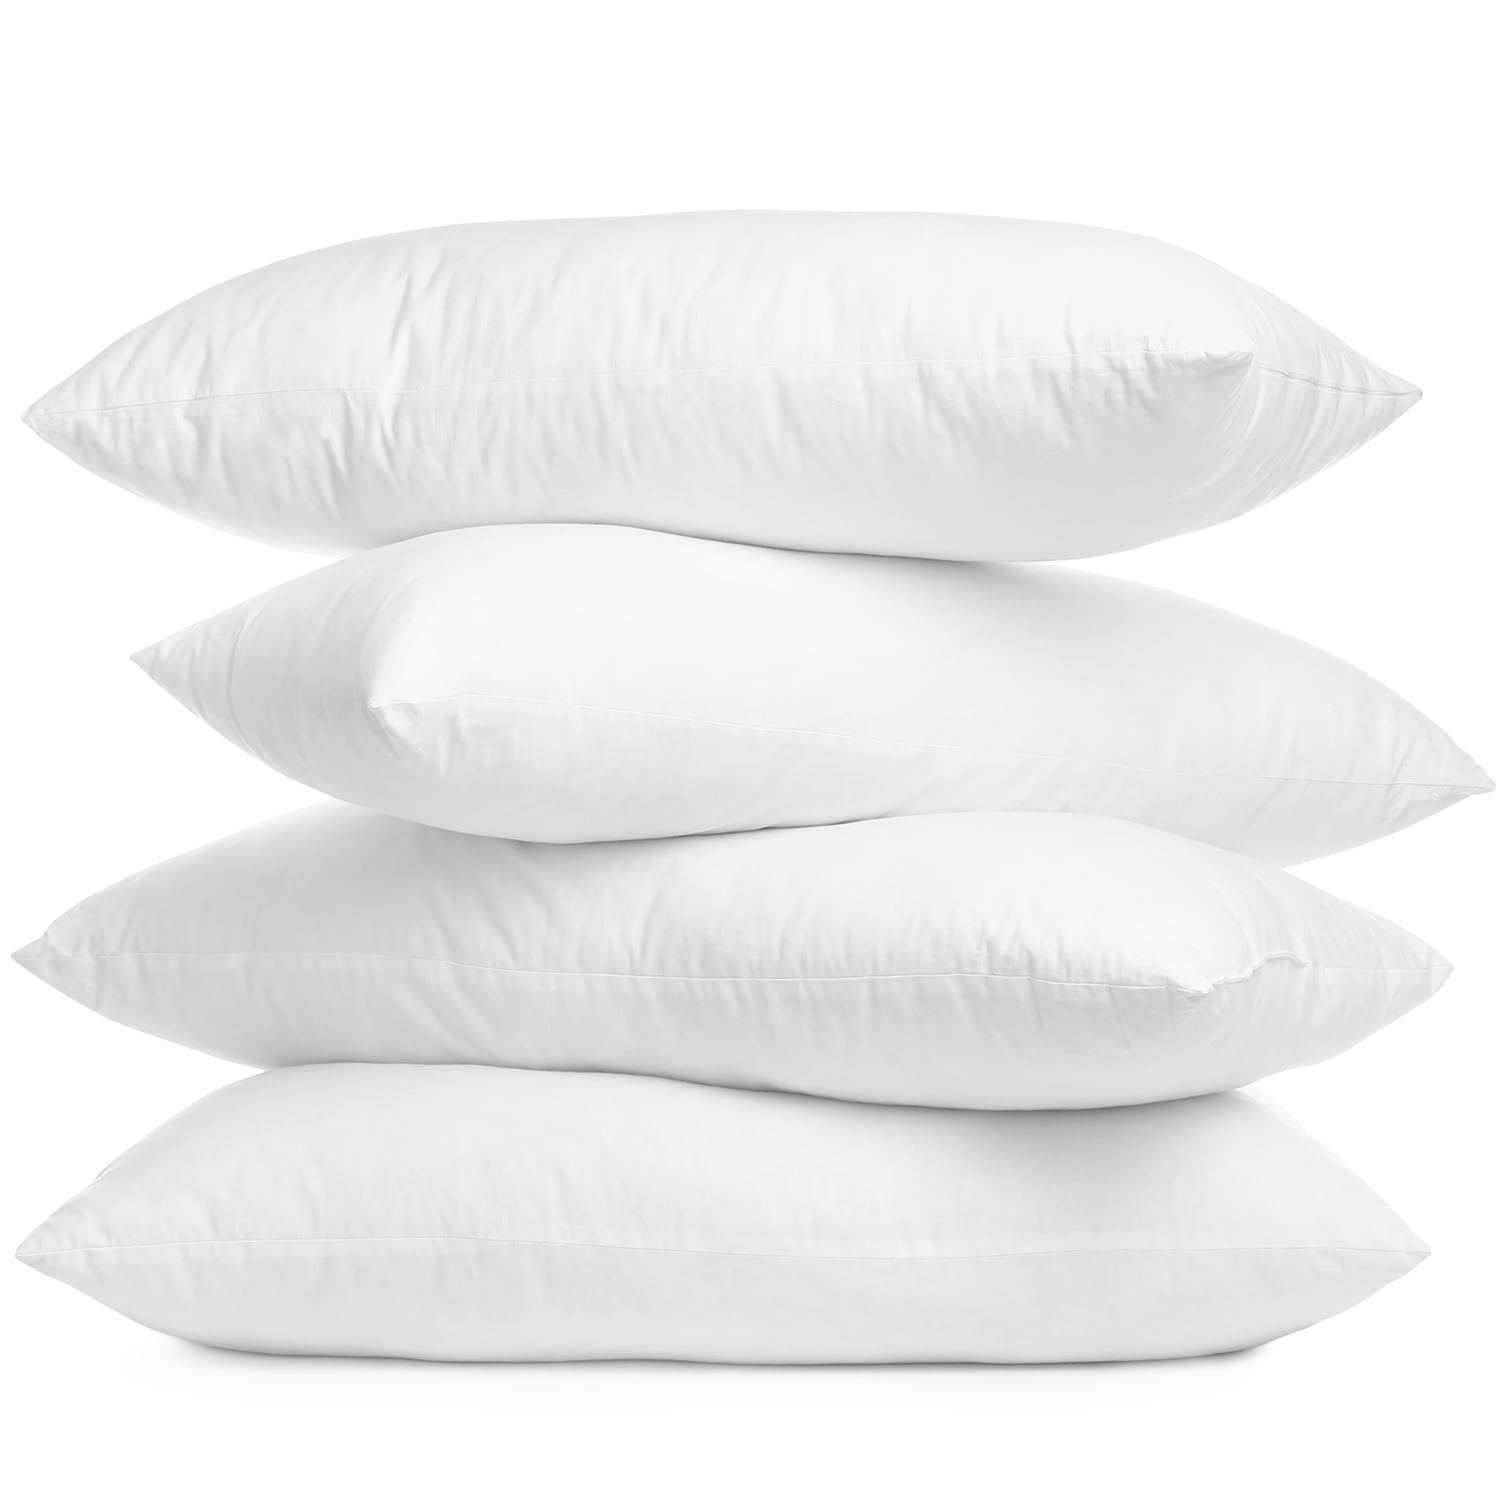 KAKABELL 18x18 Pillows Insert,Throw Pillows Insert (Pack of 2, White), 100%  Cotton Cover, Down Alternative Bed and Couch Pillows, Luxury Soft and Cozy